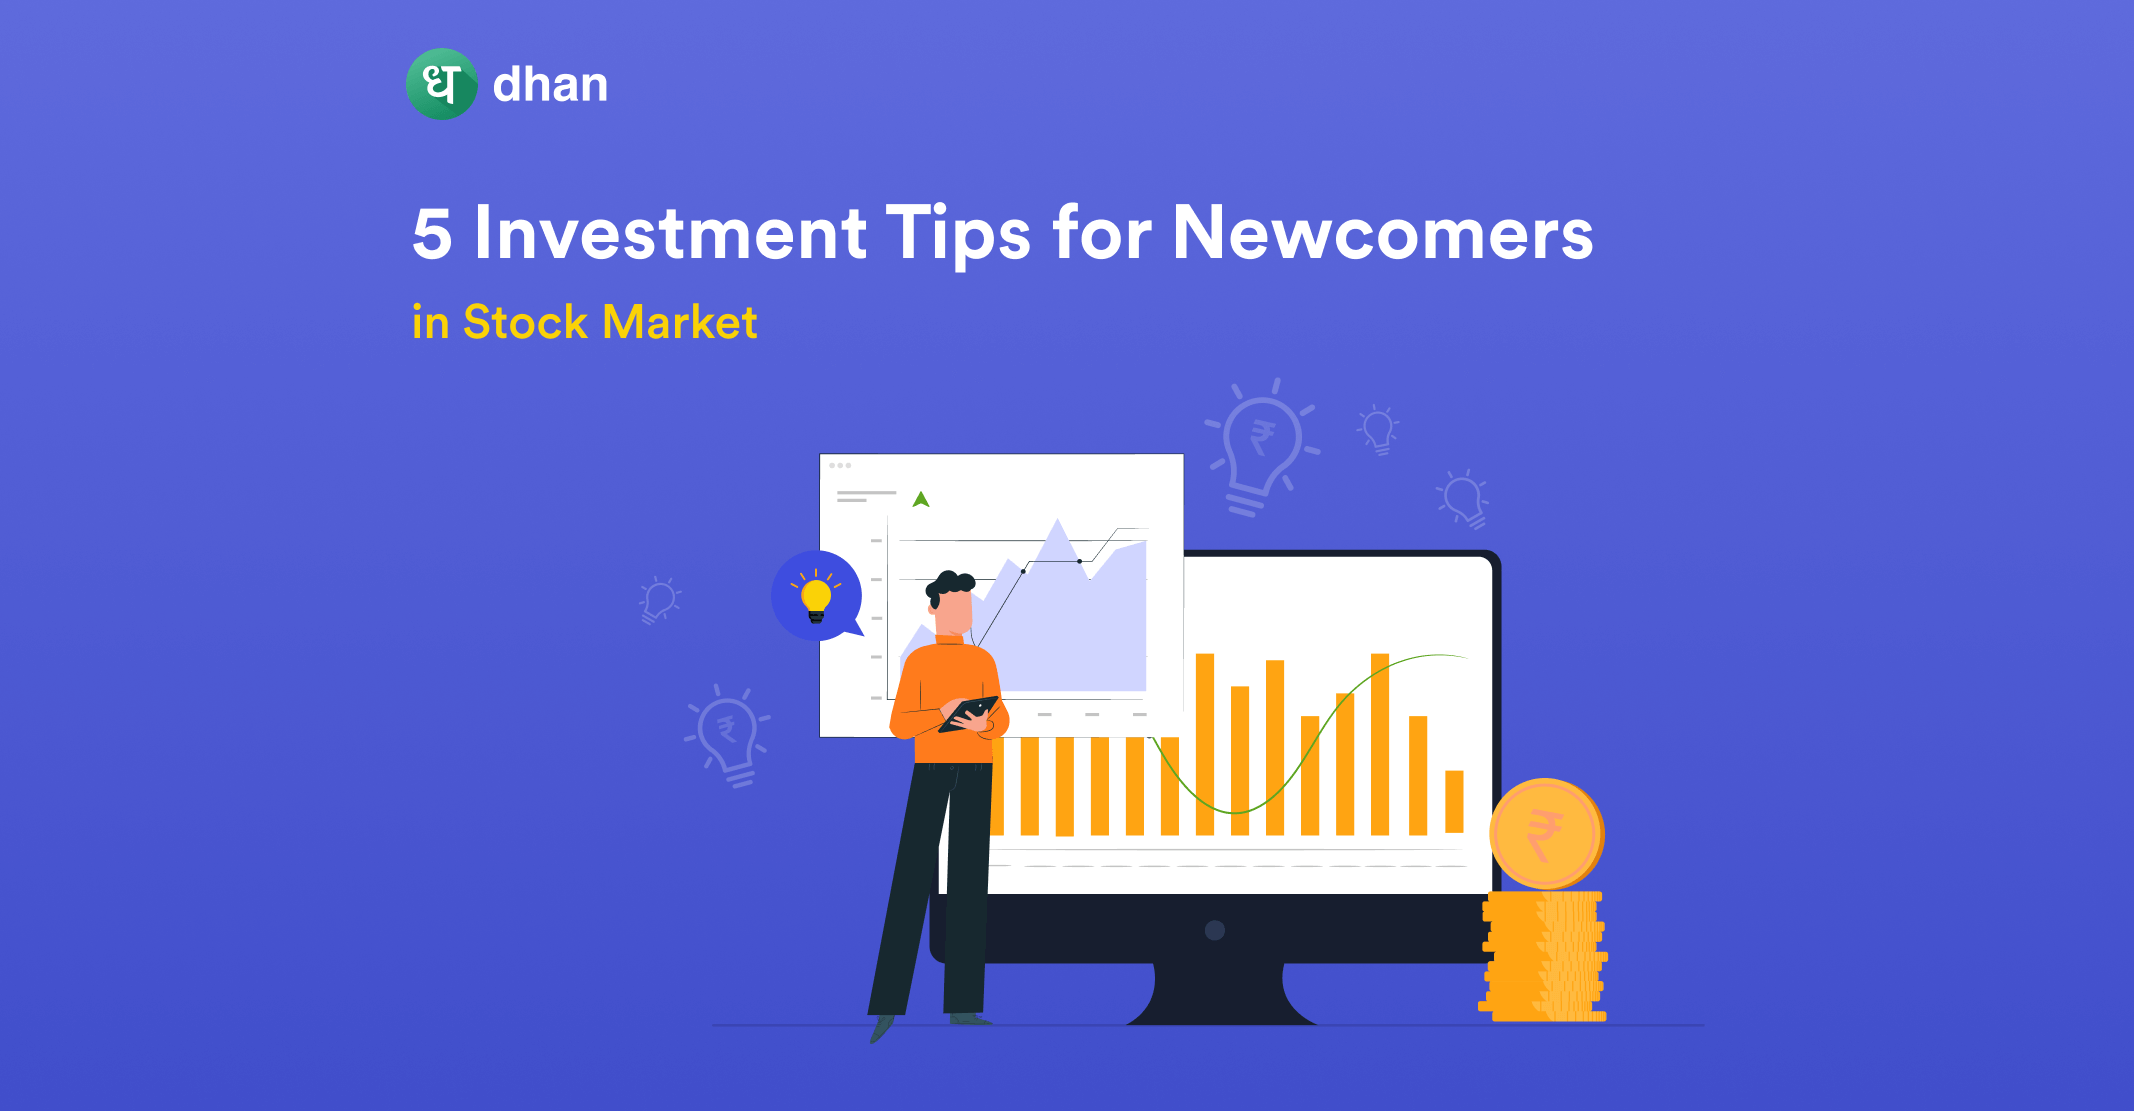 5 Investment Tips for Newcomers in the Stock Market